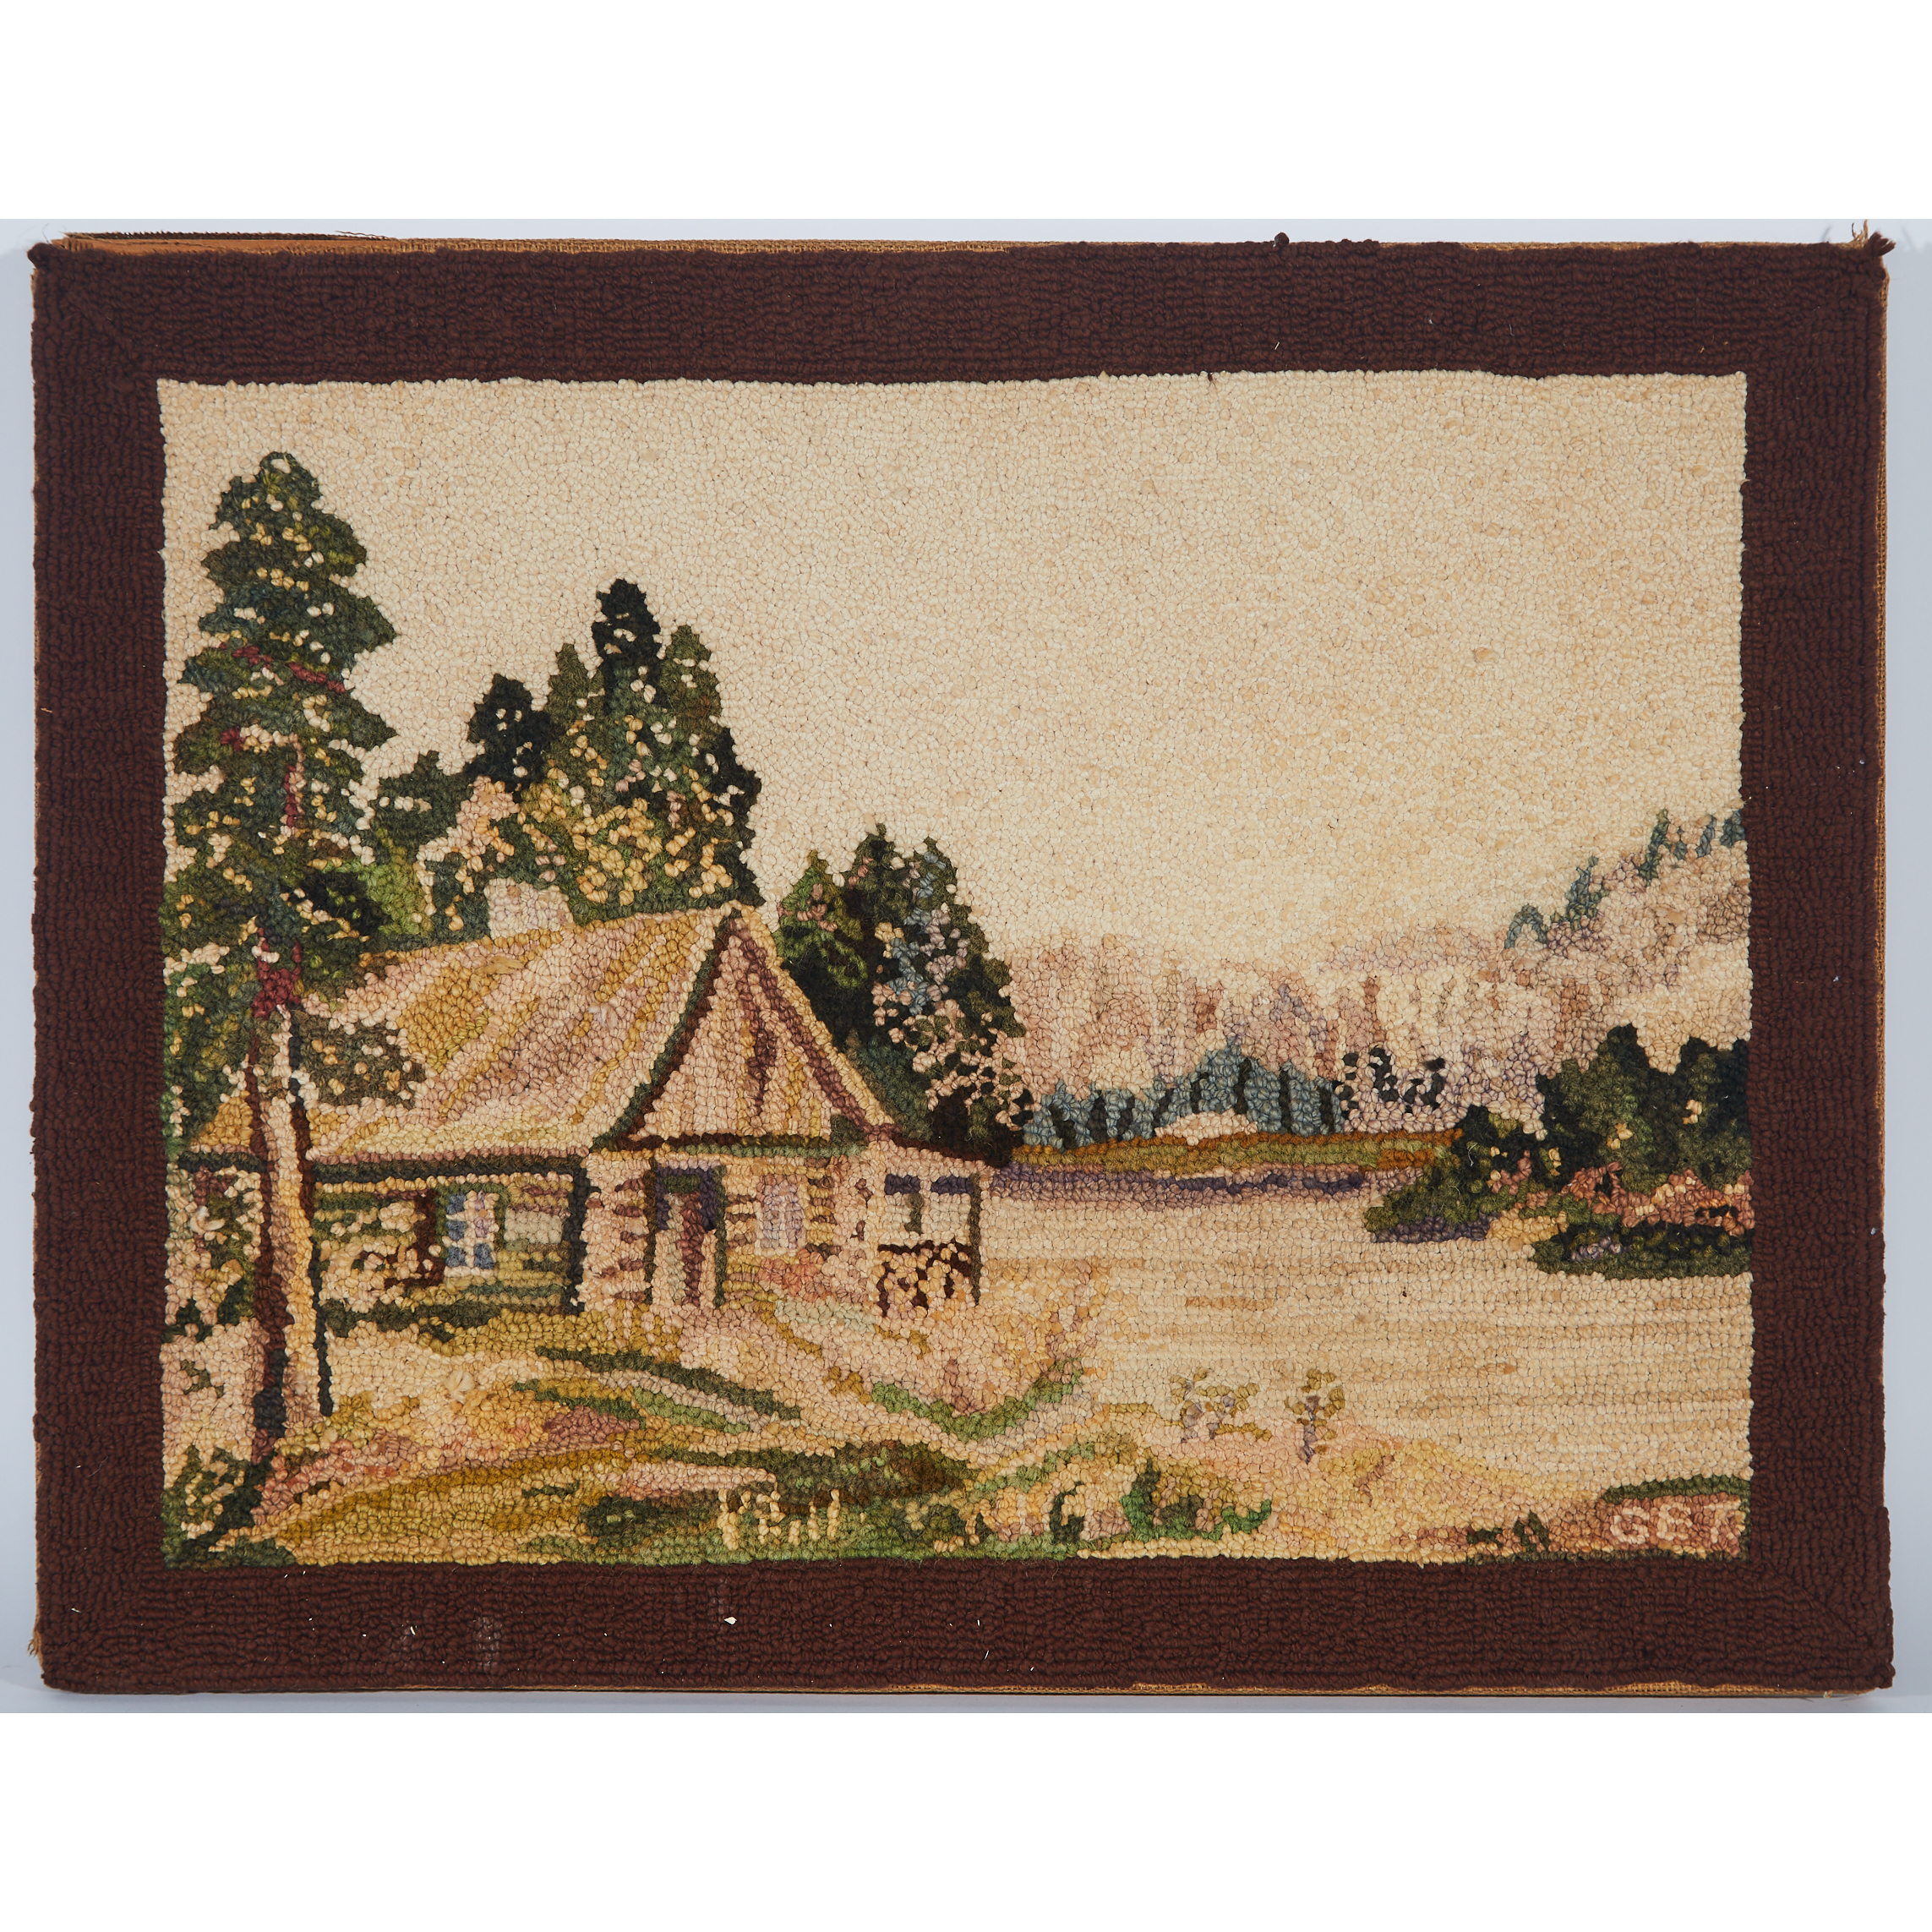 Quebec Hooked Rug, early 20th century